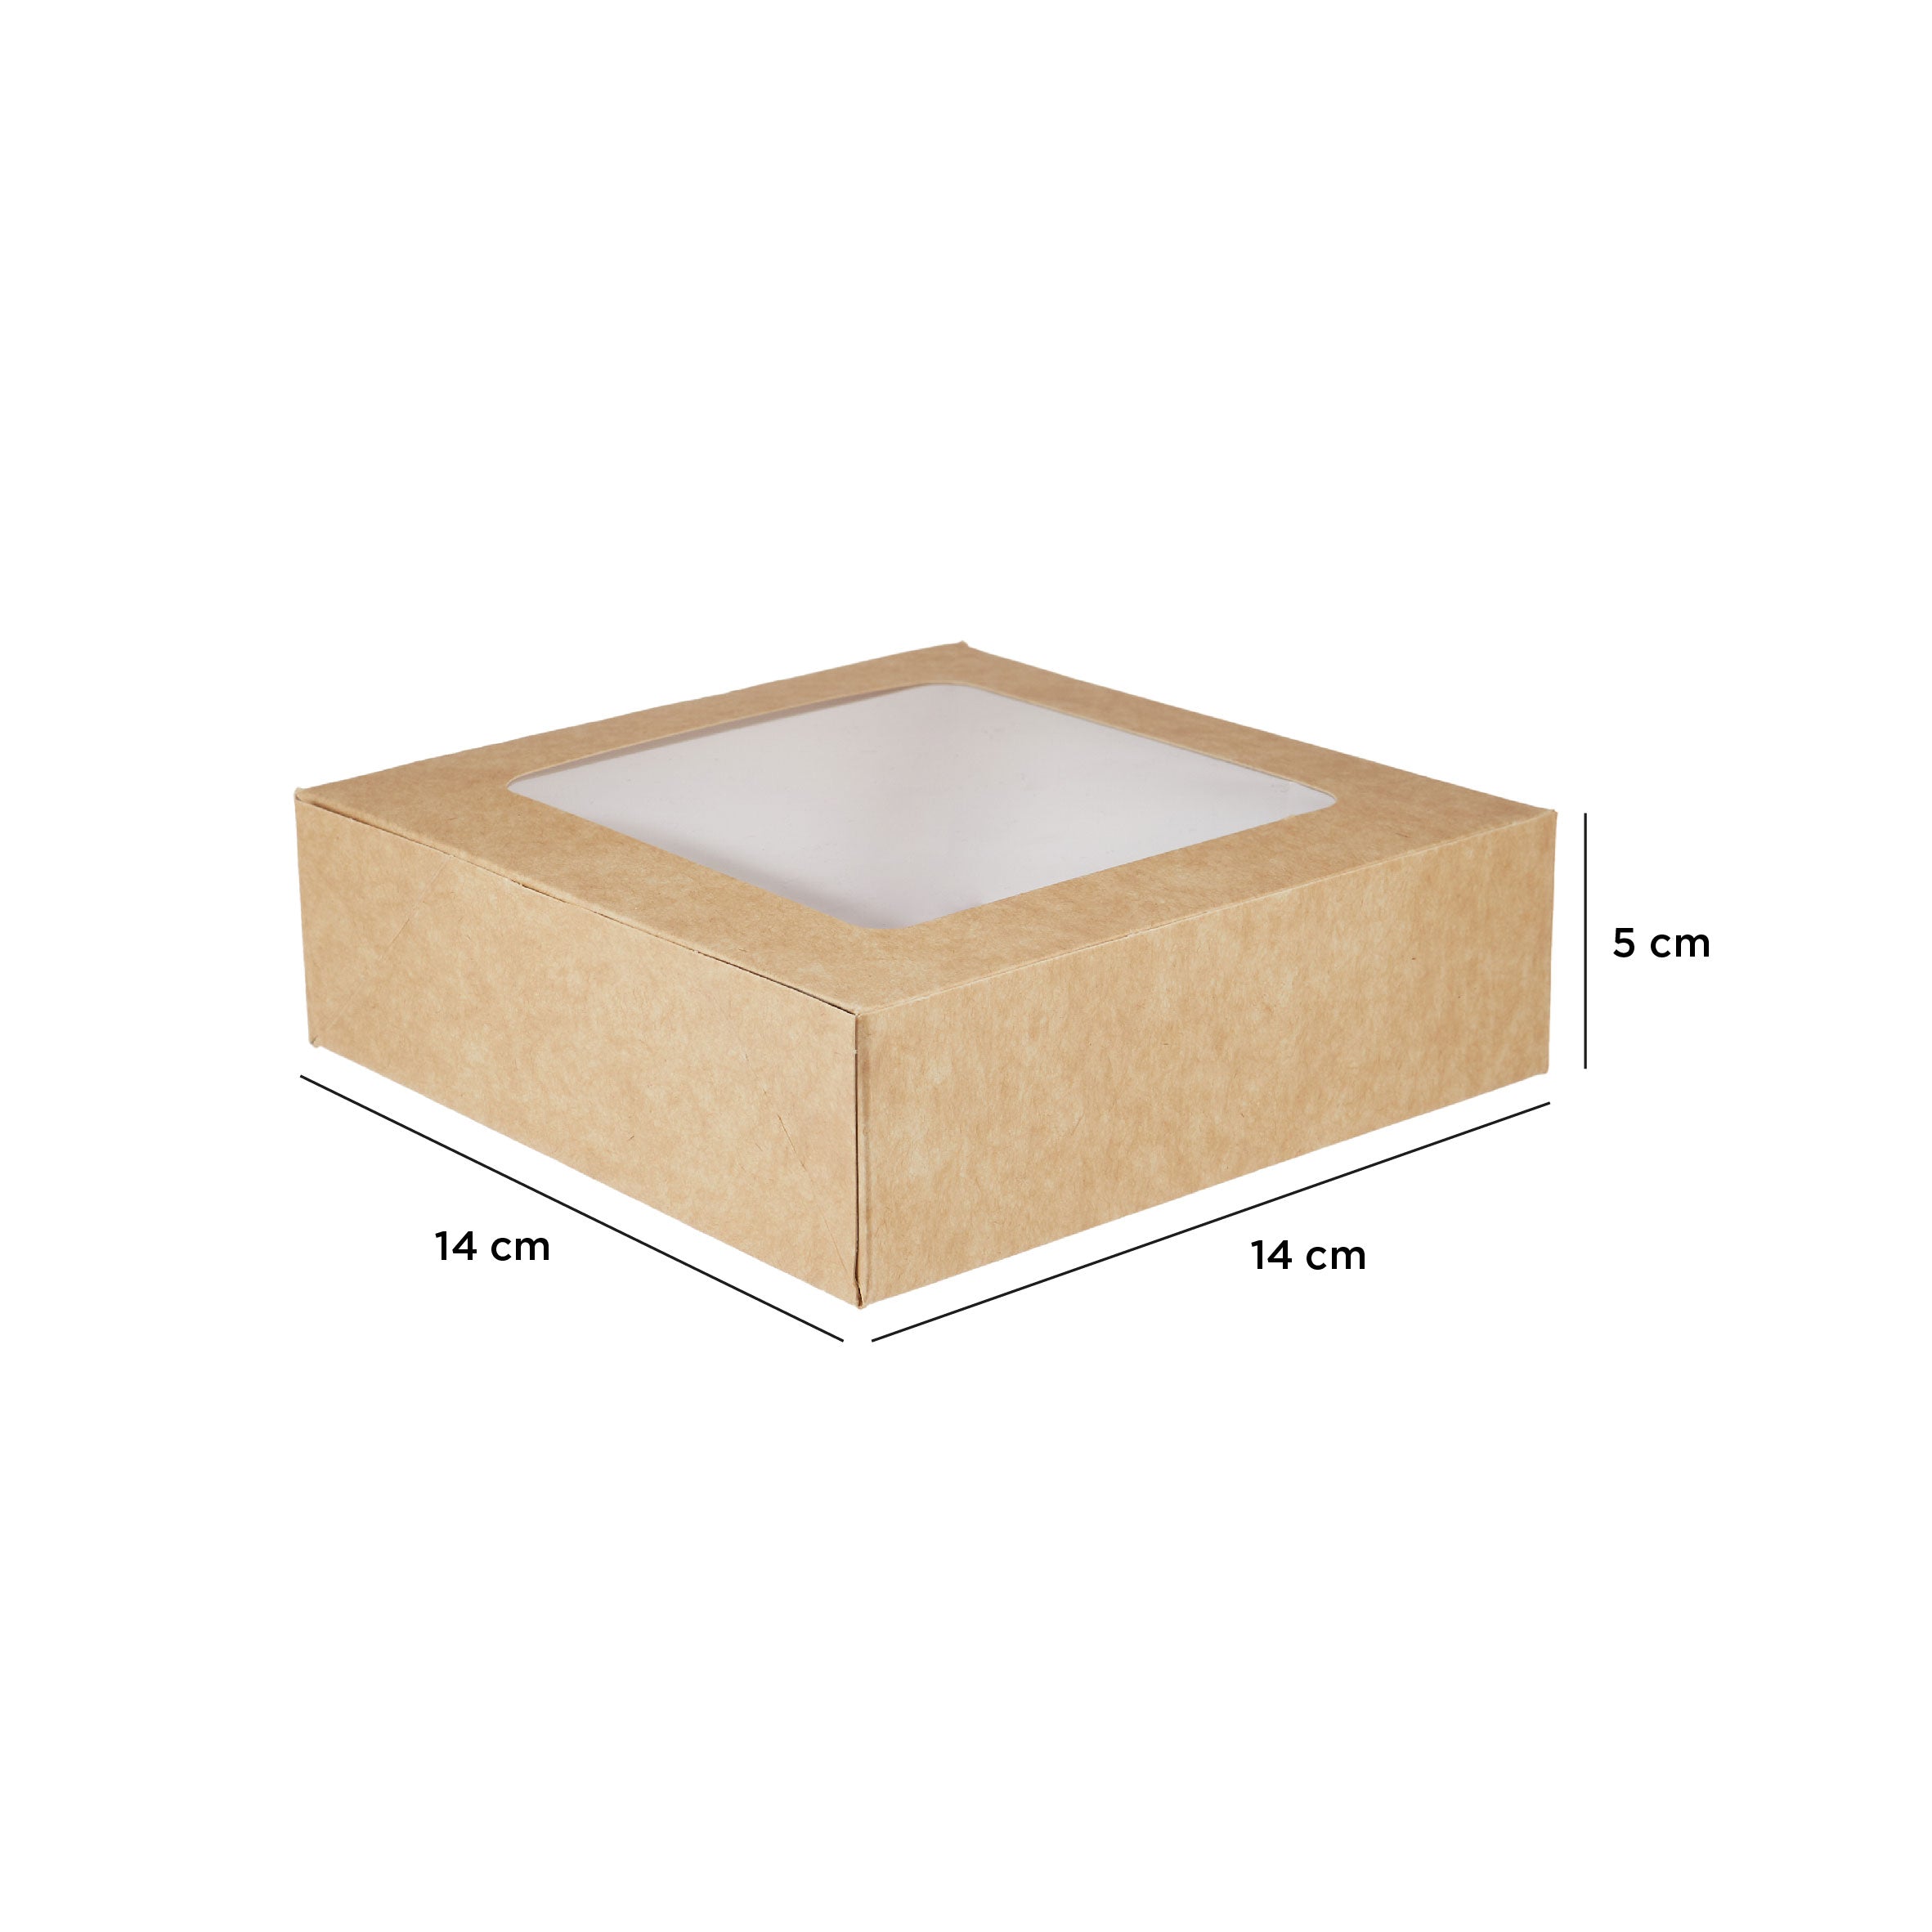 KRAFT SQUARE SALAD BOX 140 x 140 MM WITH WINDOW 250 Pieces - Hotpack Oman